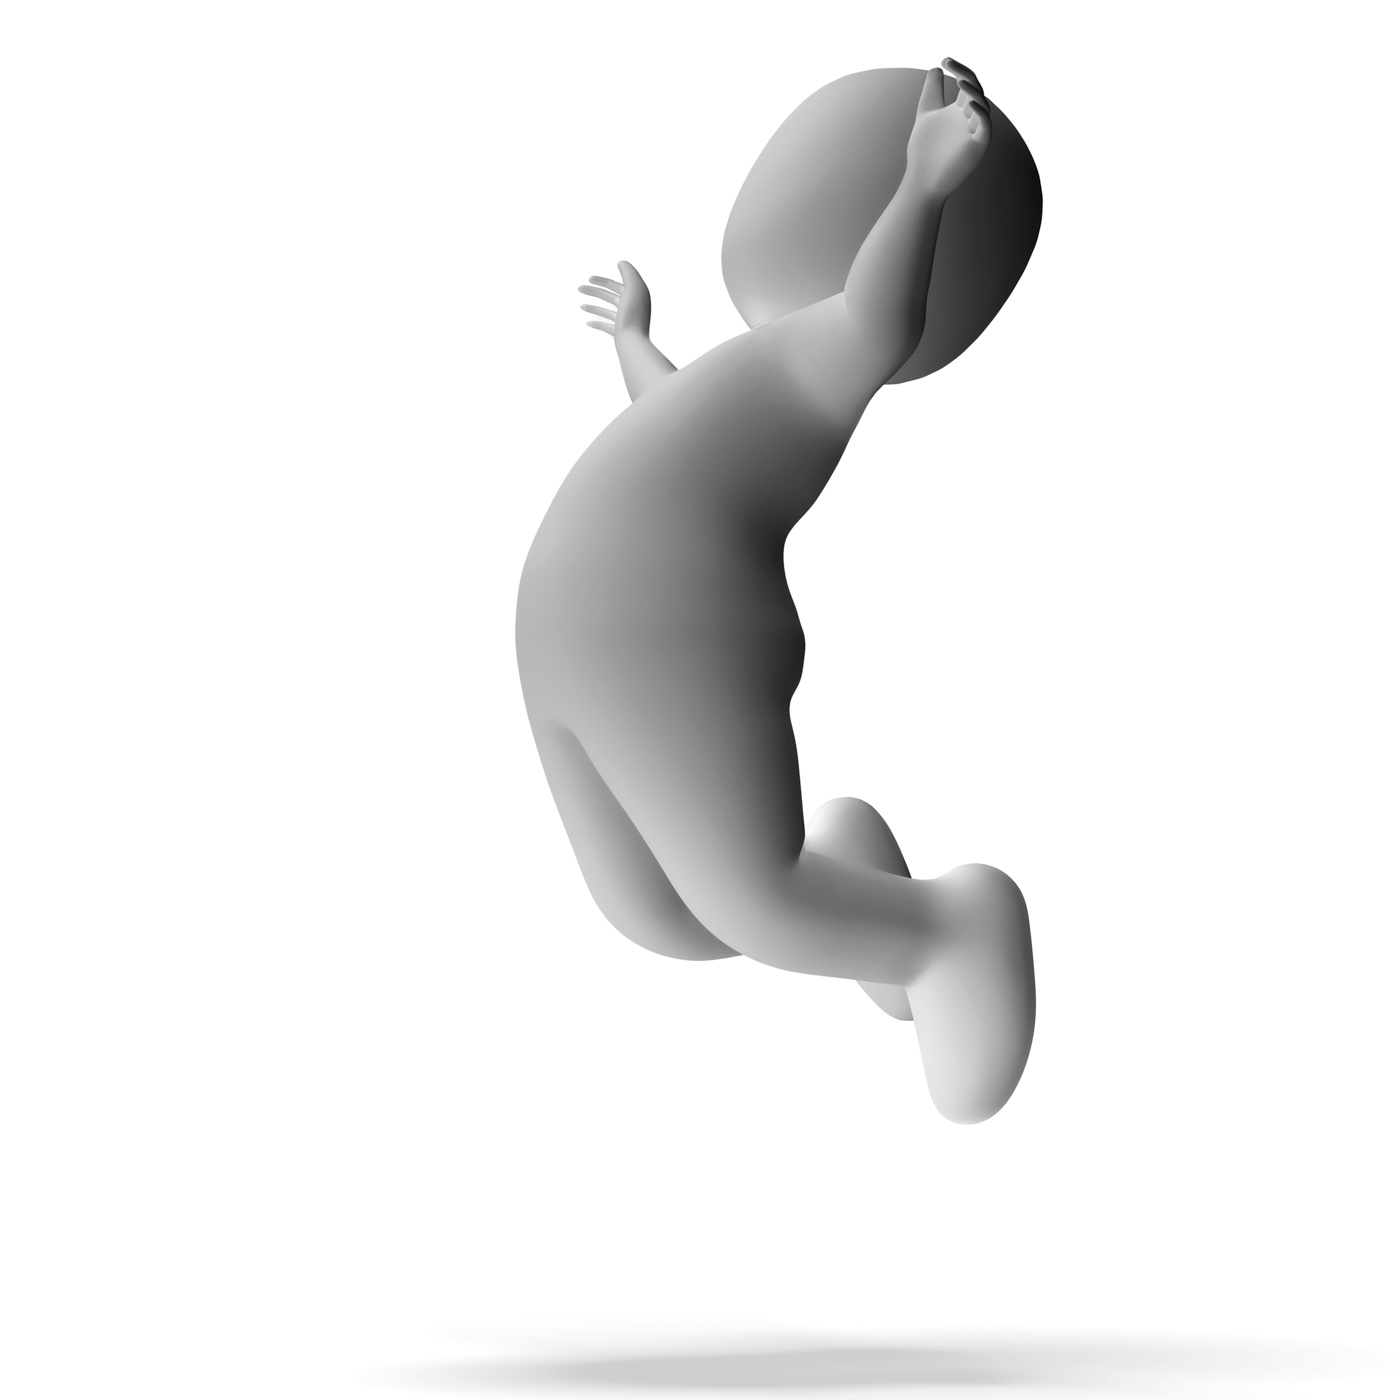 Jumping 3d character shows excitement and joy photo